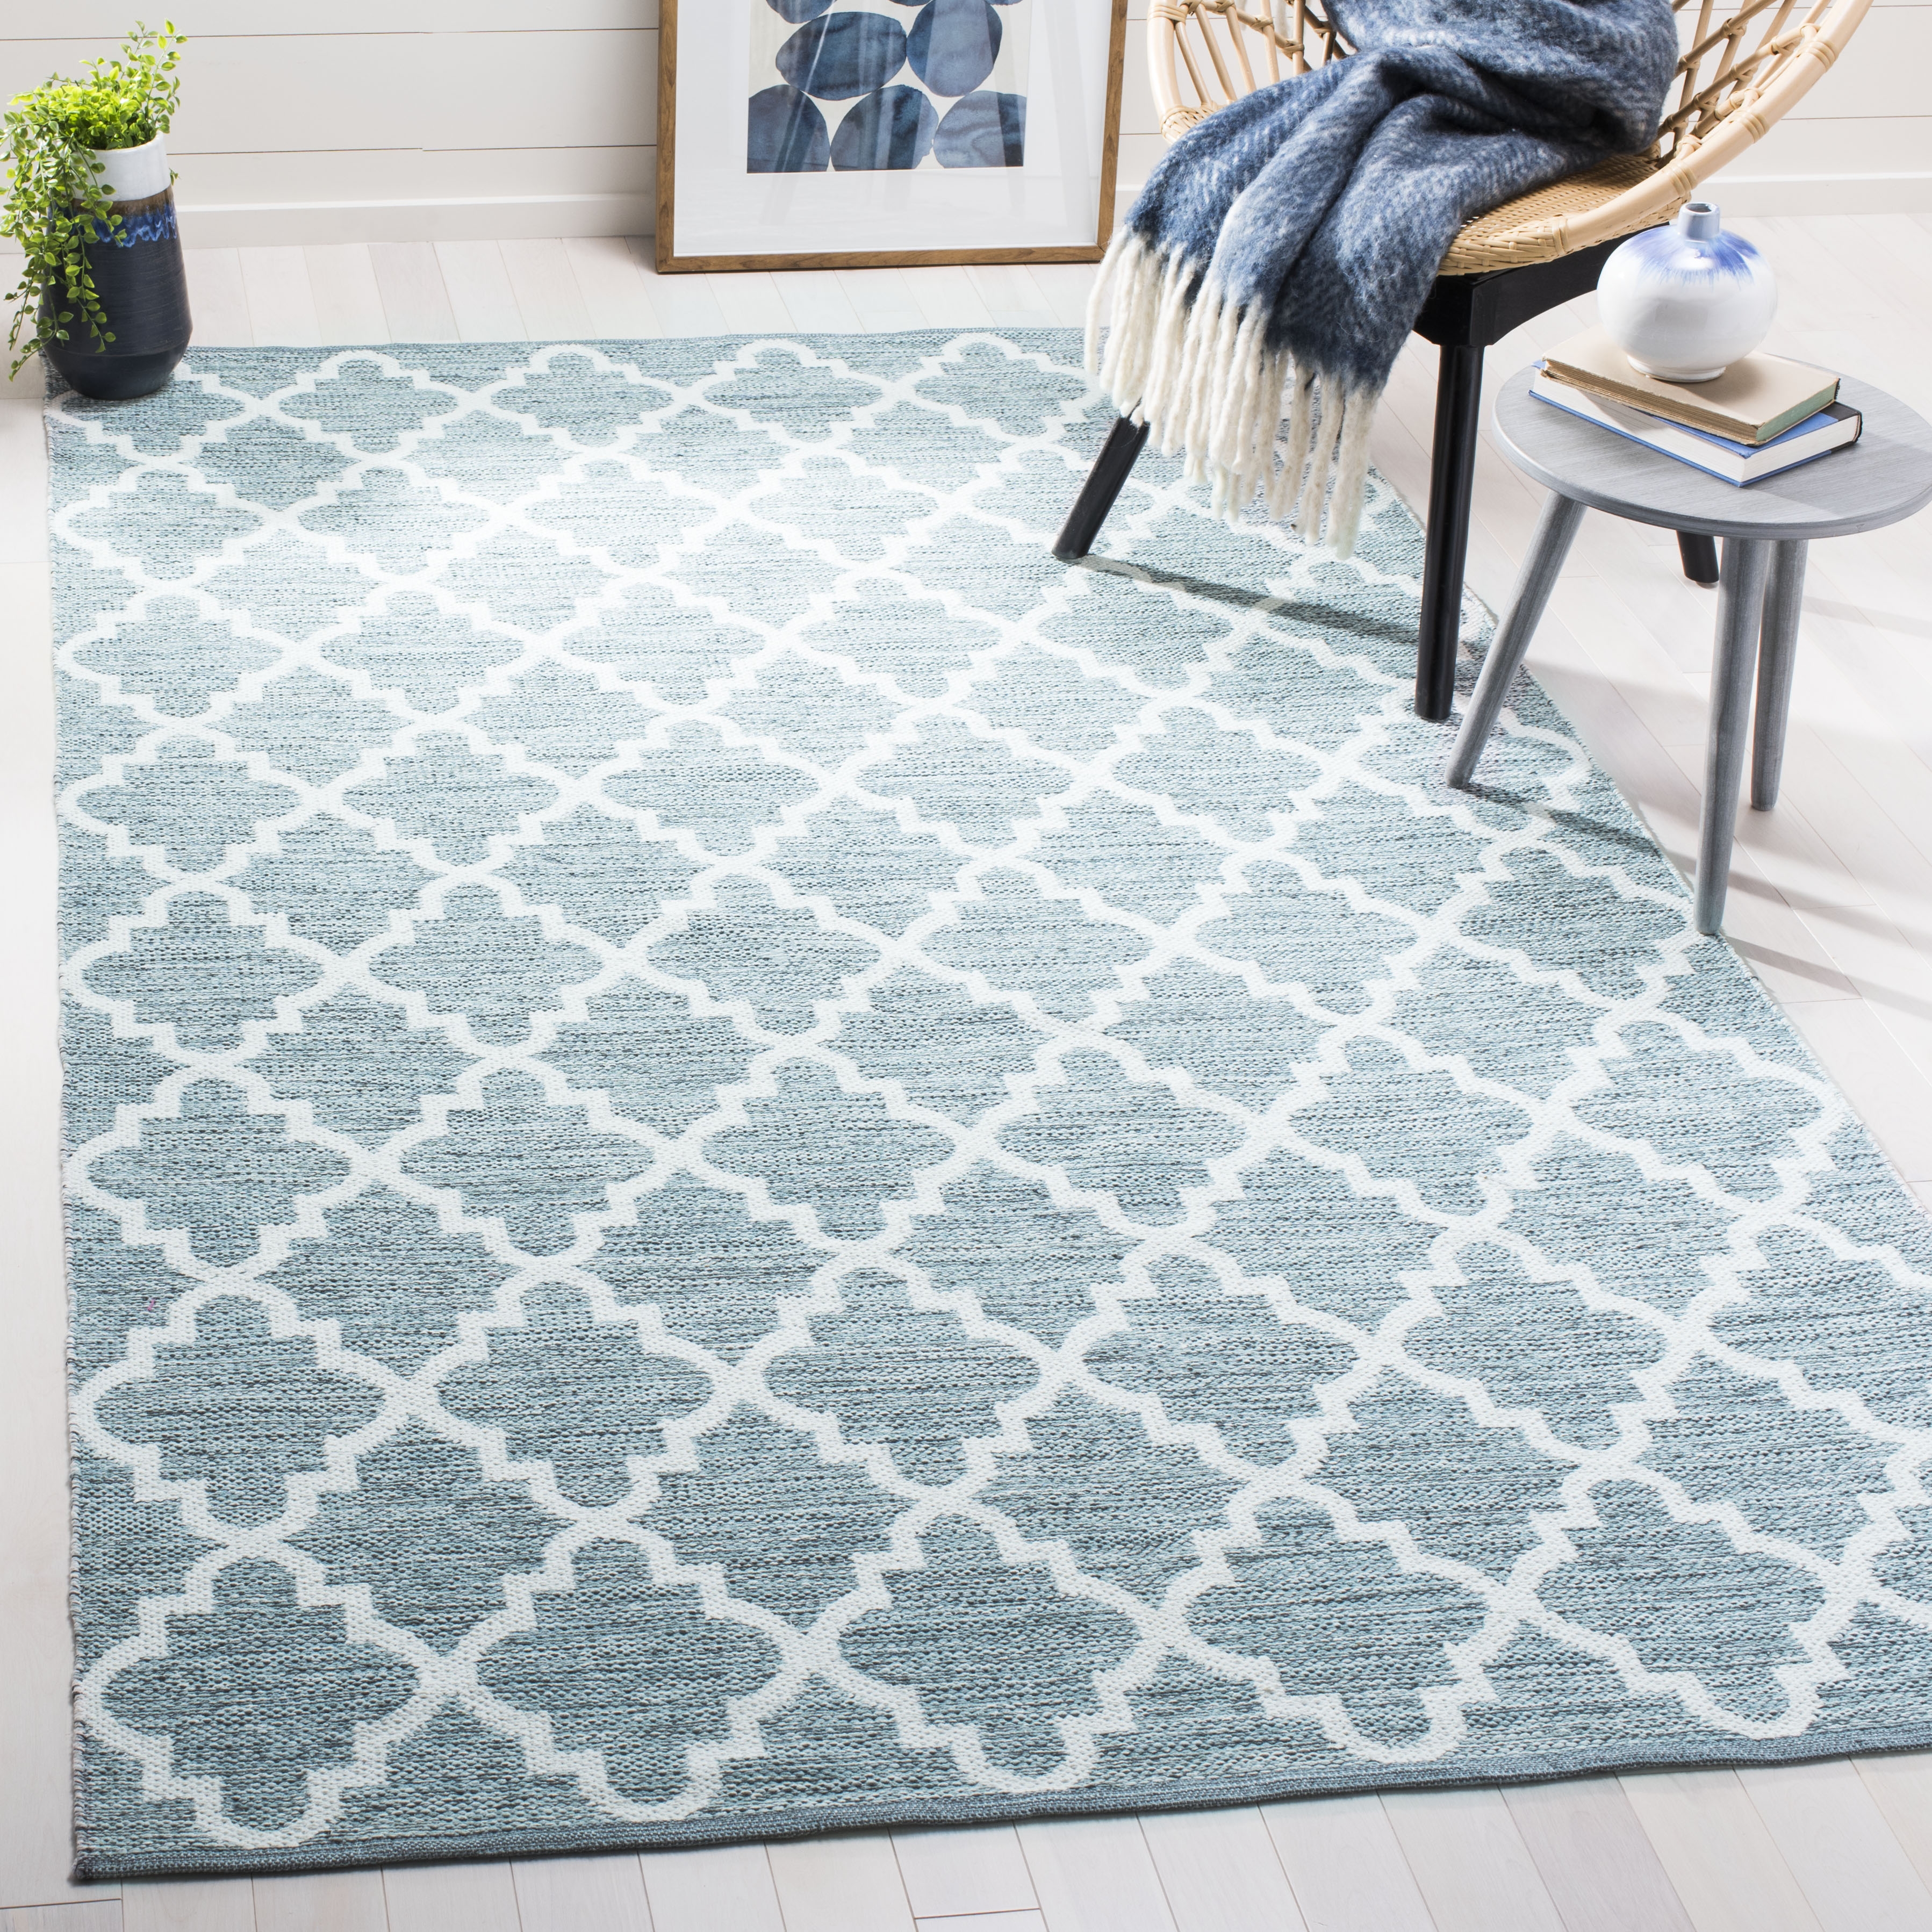 Arlo Home Hand Woven Area Rug, MTK611T, Mint/Ivory,  5' X 8' - Image 1